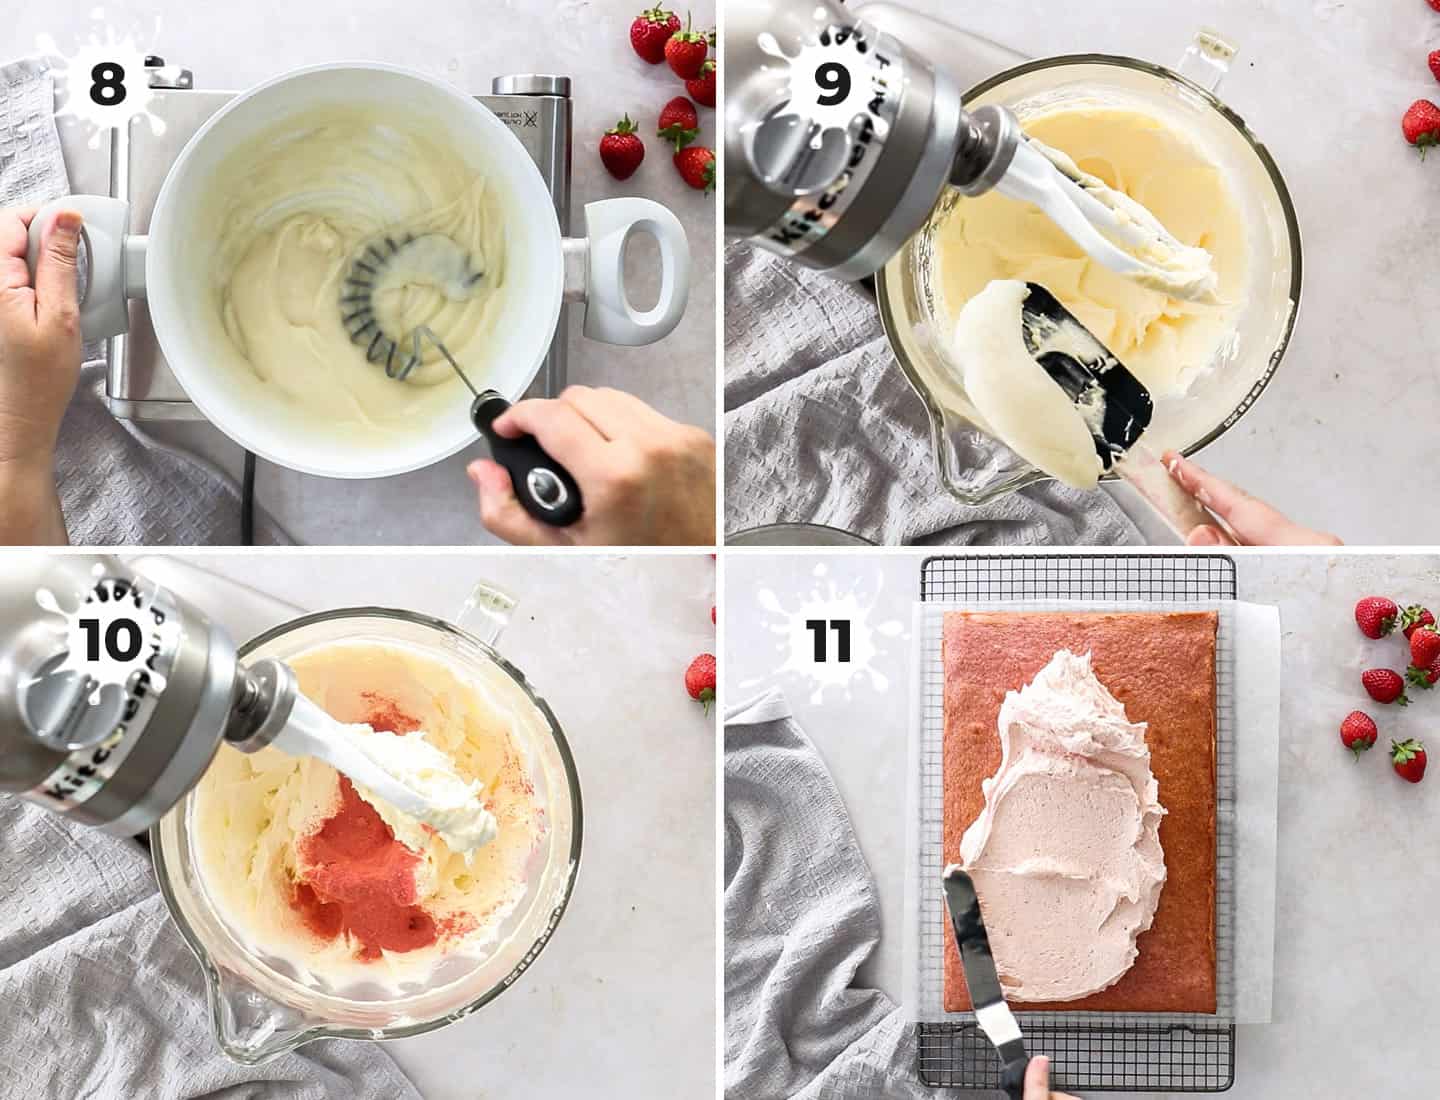 A collage of 4 images showing how to make the strawberry frosting.